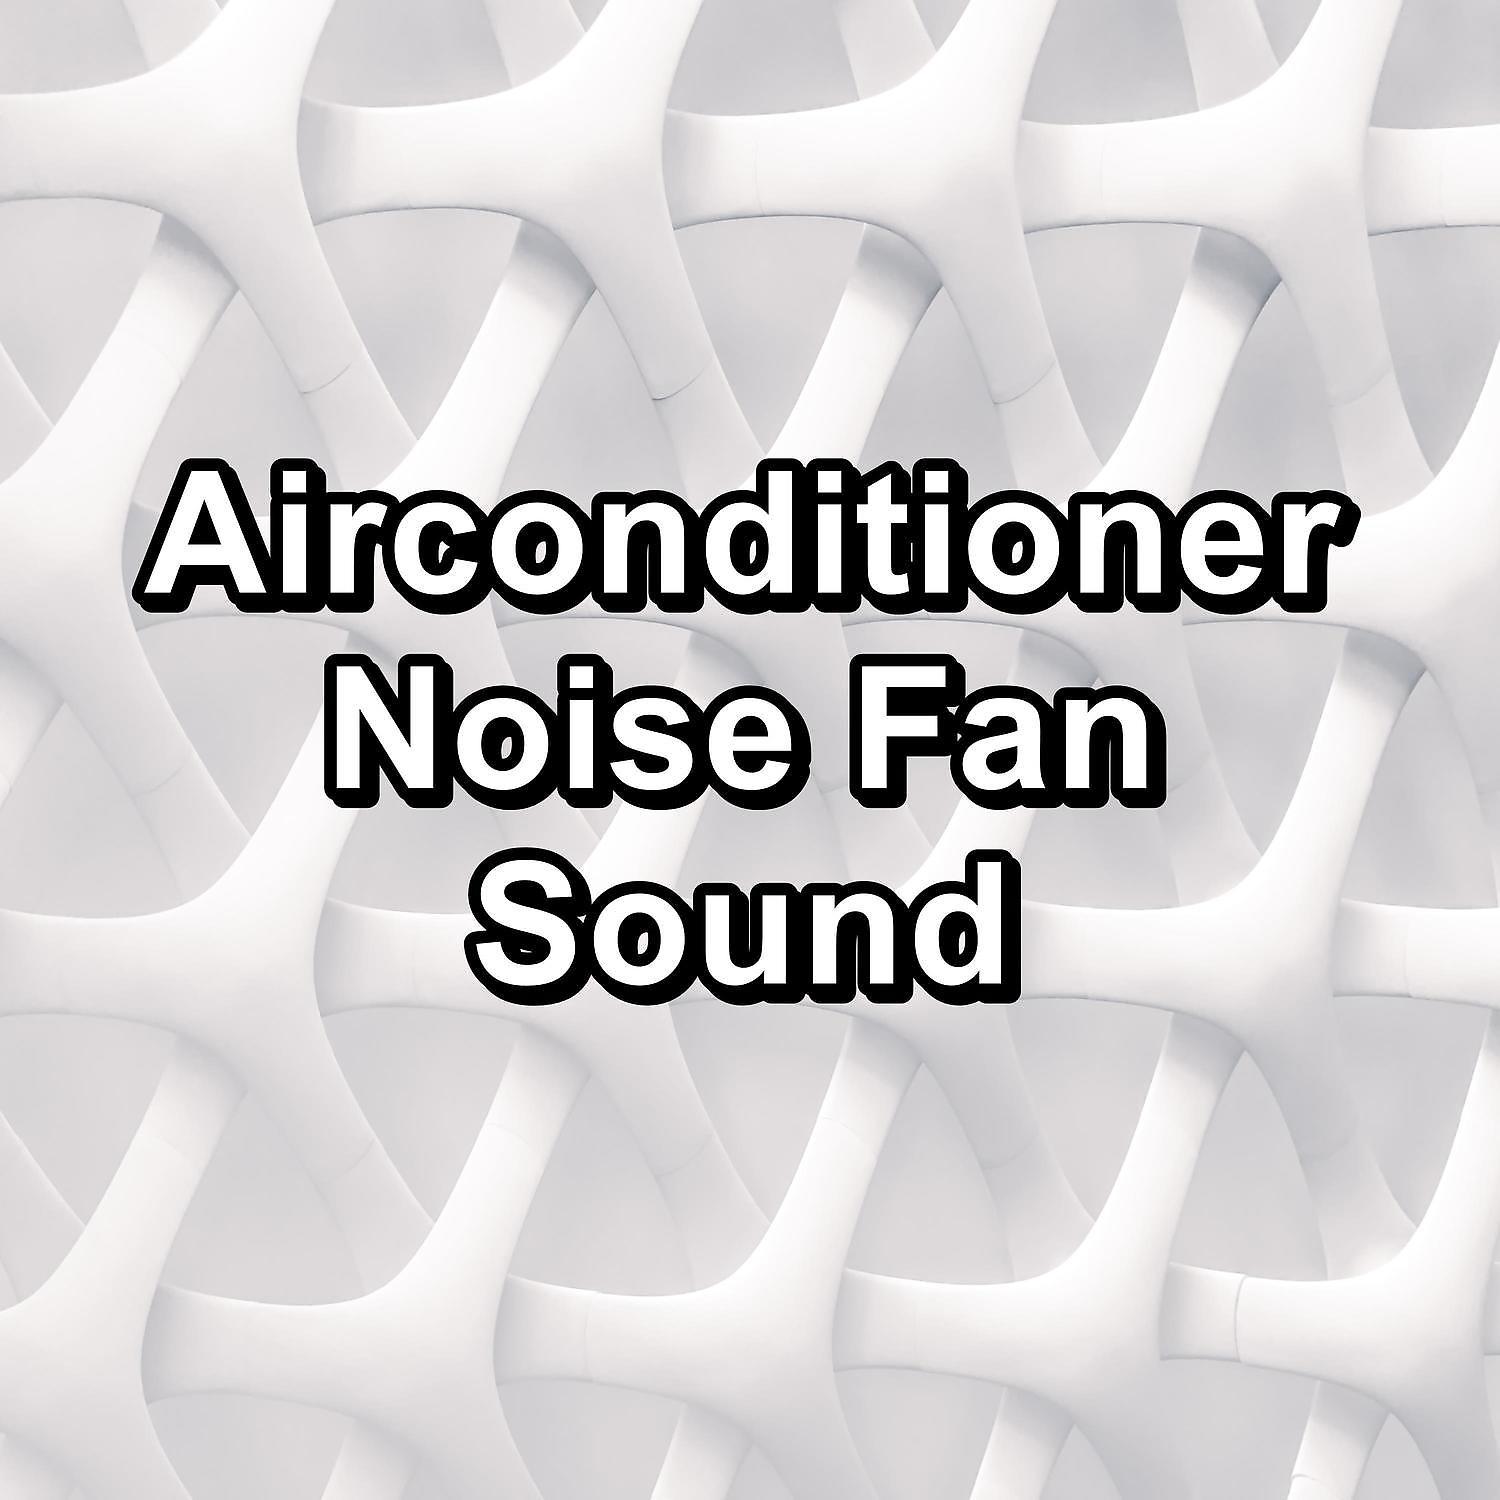 Brown Noise Sound, Pink Noise Sound, White Noise Sound - Fan Sounds to Loop Loopable for 24 Hours